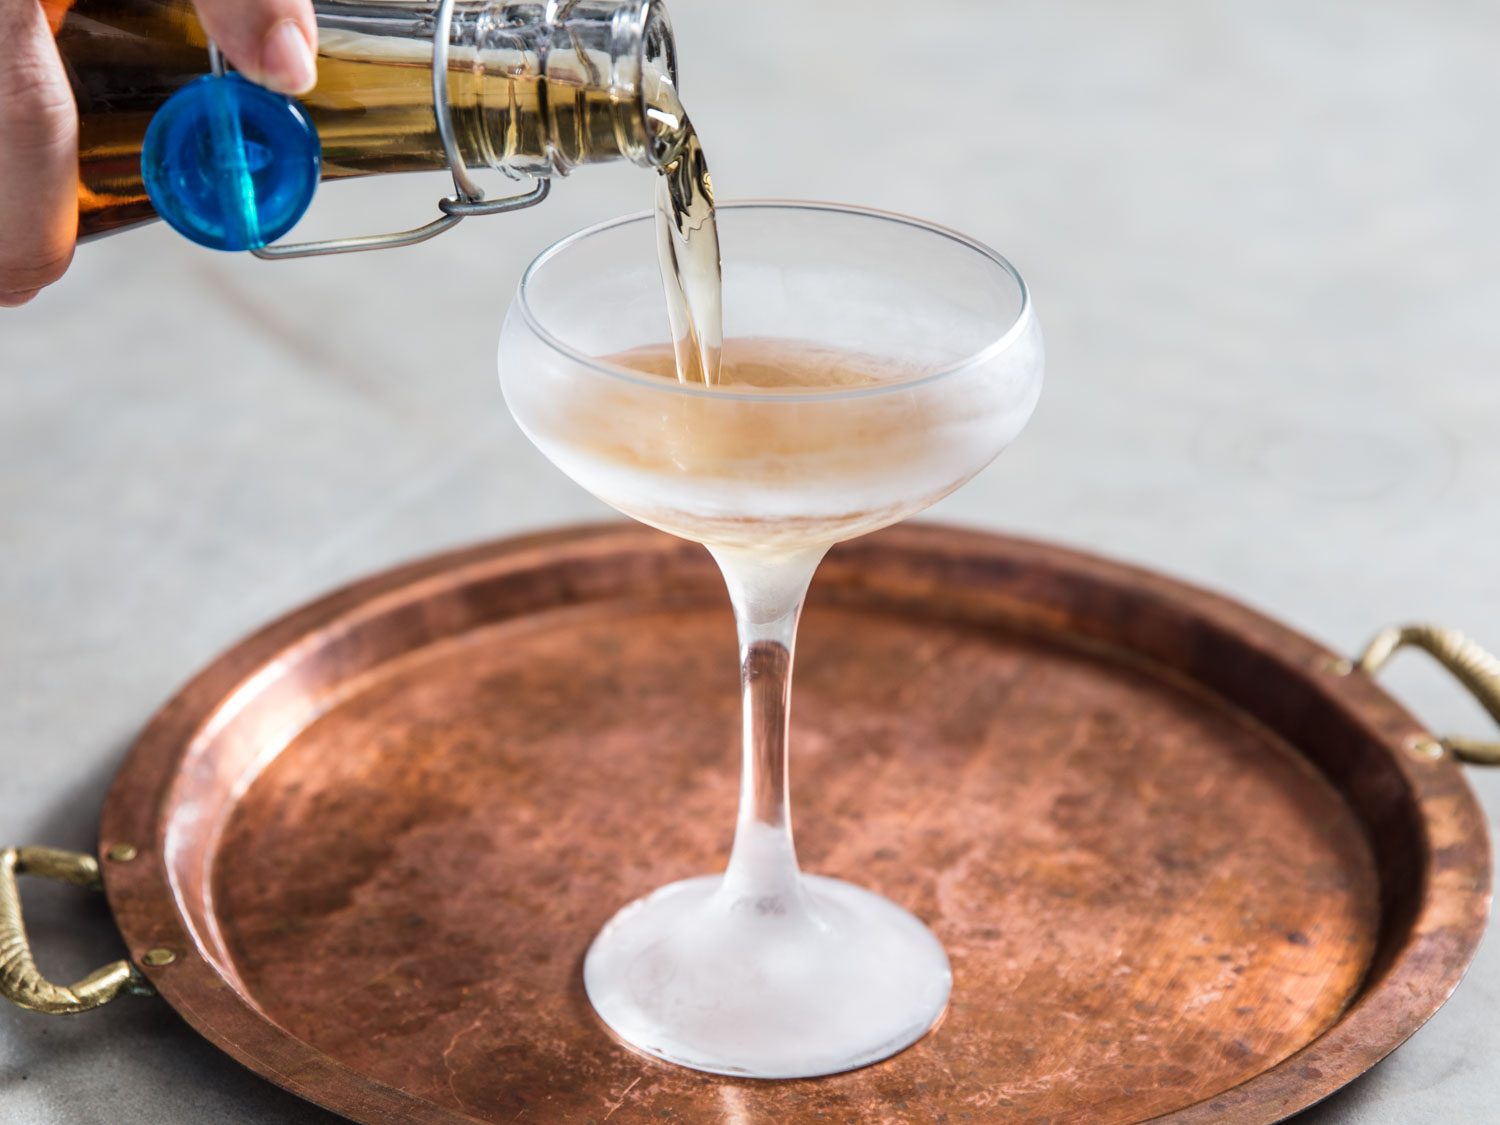 Pouring the Three Piece Suit Cocktail into a chilled coupe glass